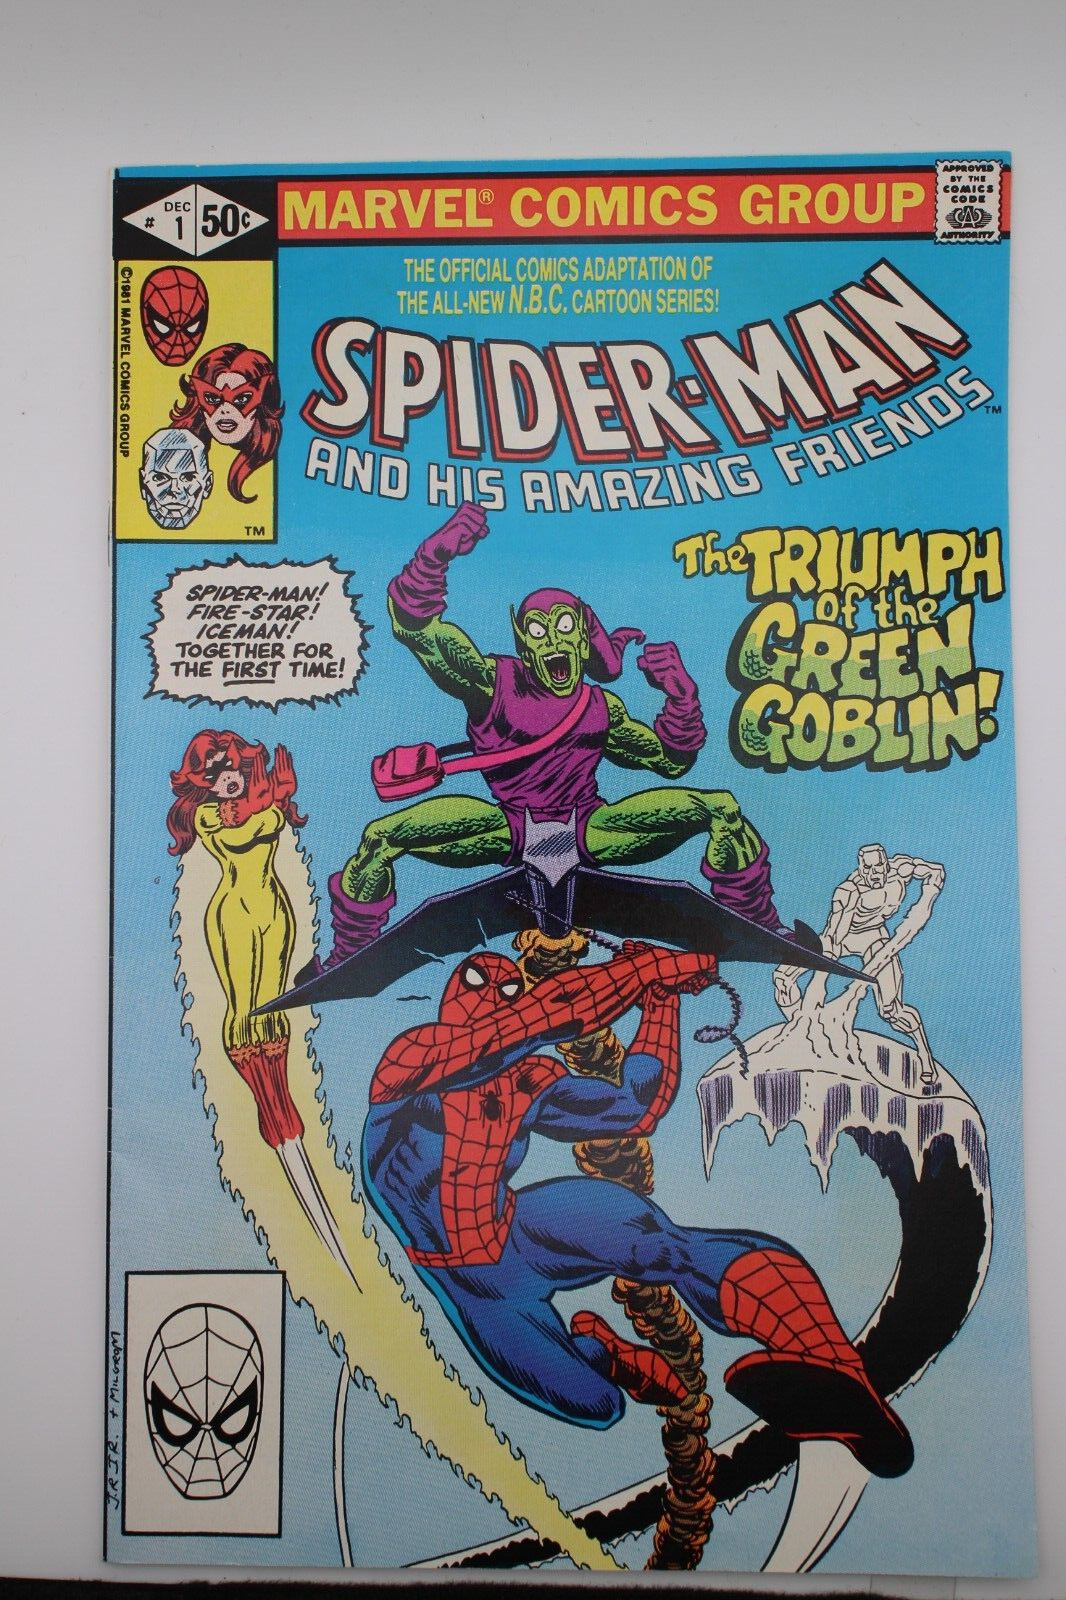 HIGH GRADE *SPIDER-MAN AND HIS AMAZING FRIENDS* 1981 - ADAPT OF CARTOON SERIES